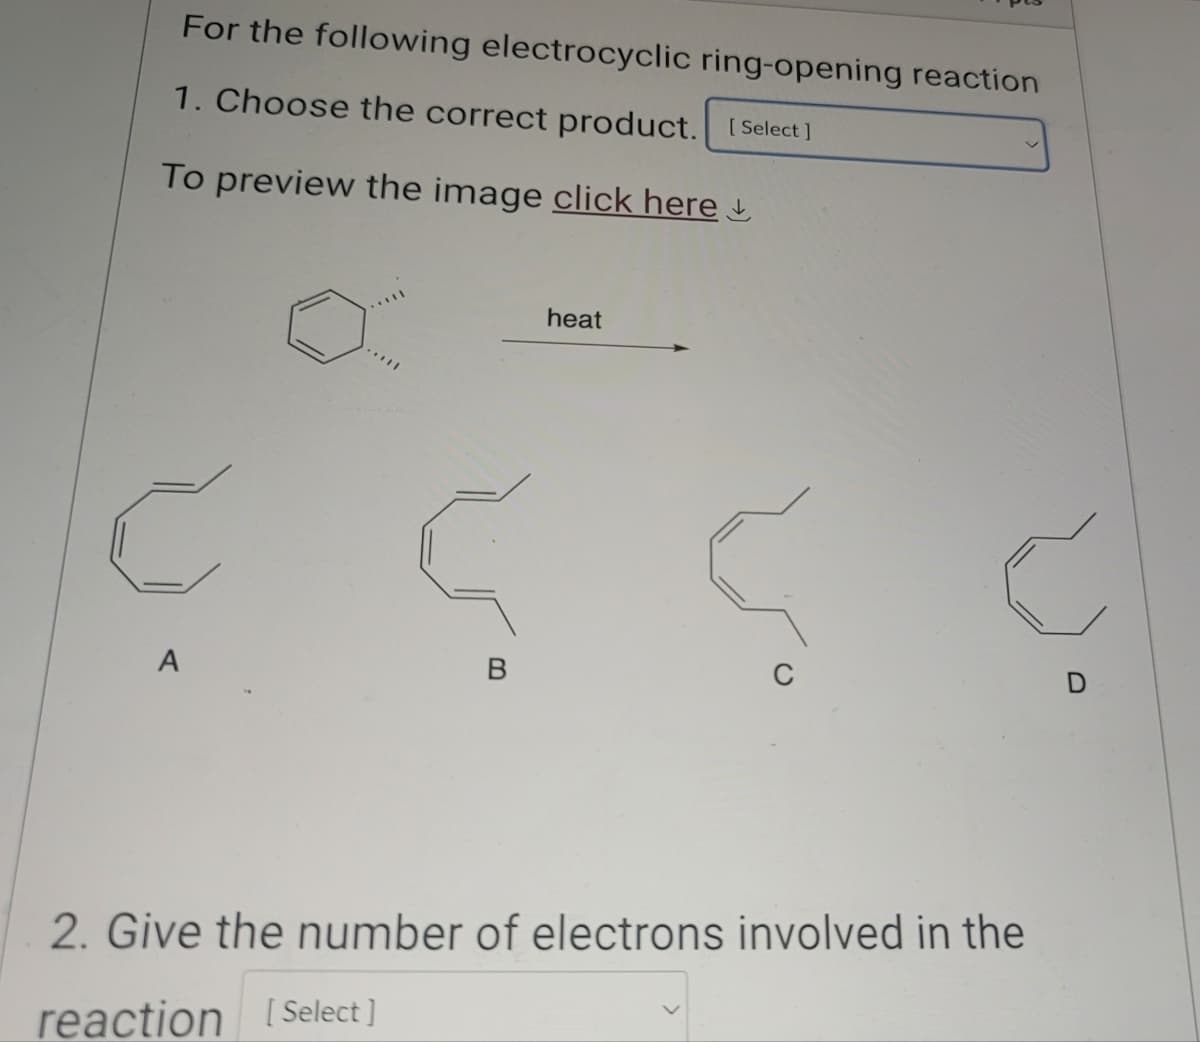 For the following electrocyclic ring-opening reaction
1. Choose the correct product. [Select]
To preview the image click here
C
A
B
heat
2. Give the number of electrons involved in the
reaction [Select]
D